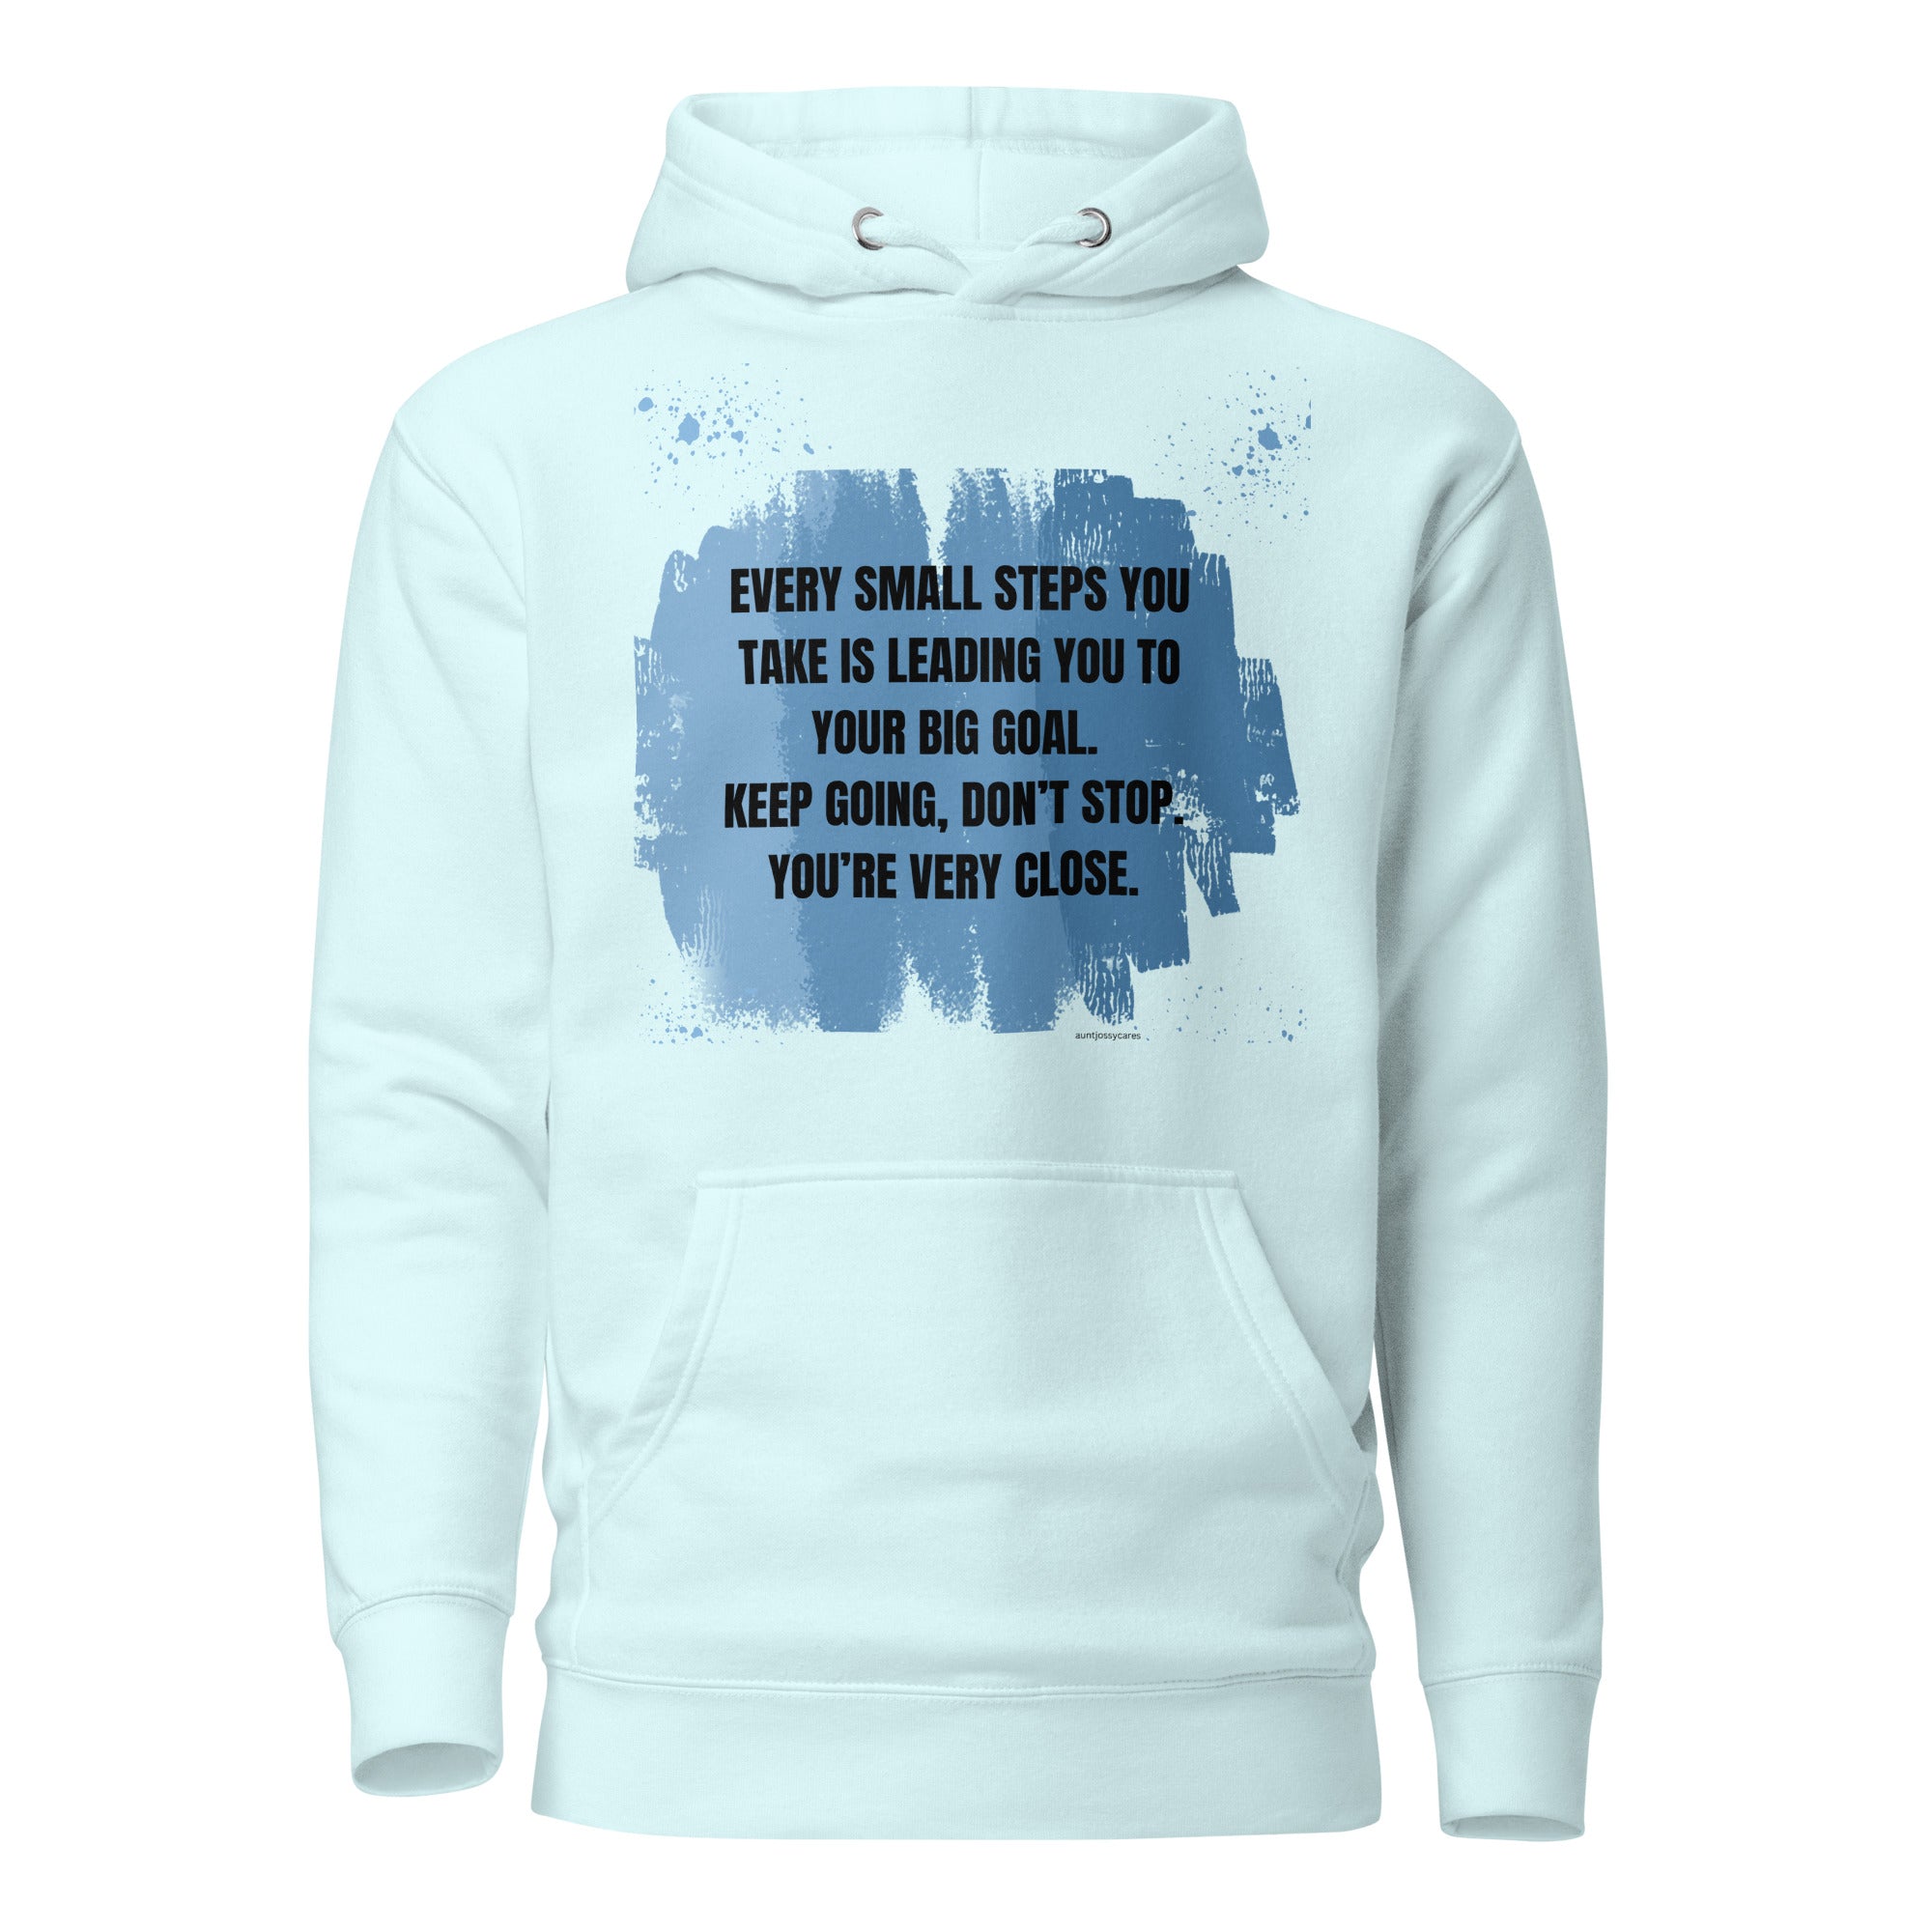 Keep going, don't stop Unisex Hoodie